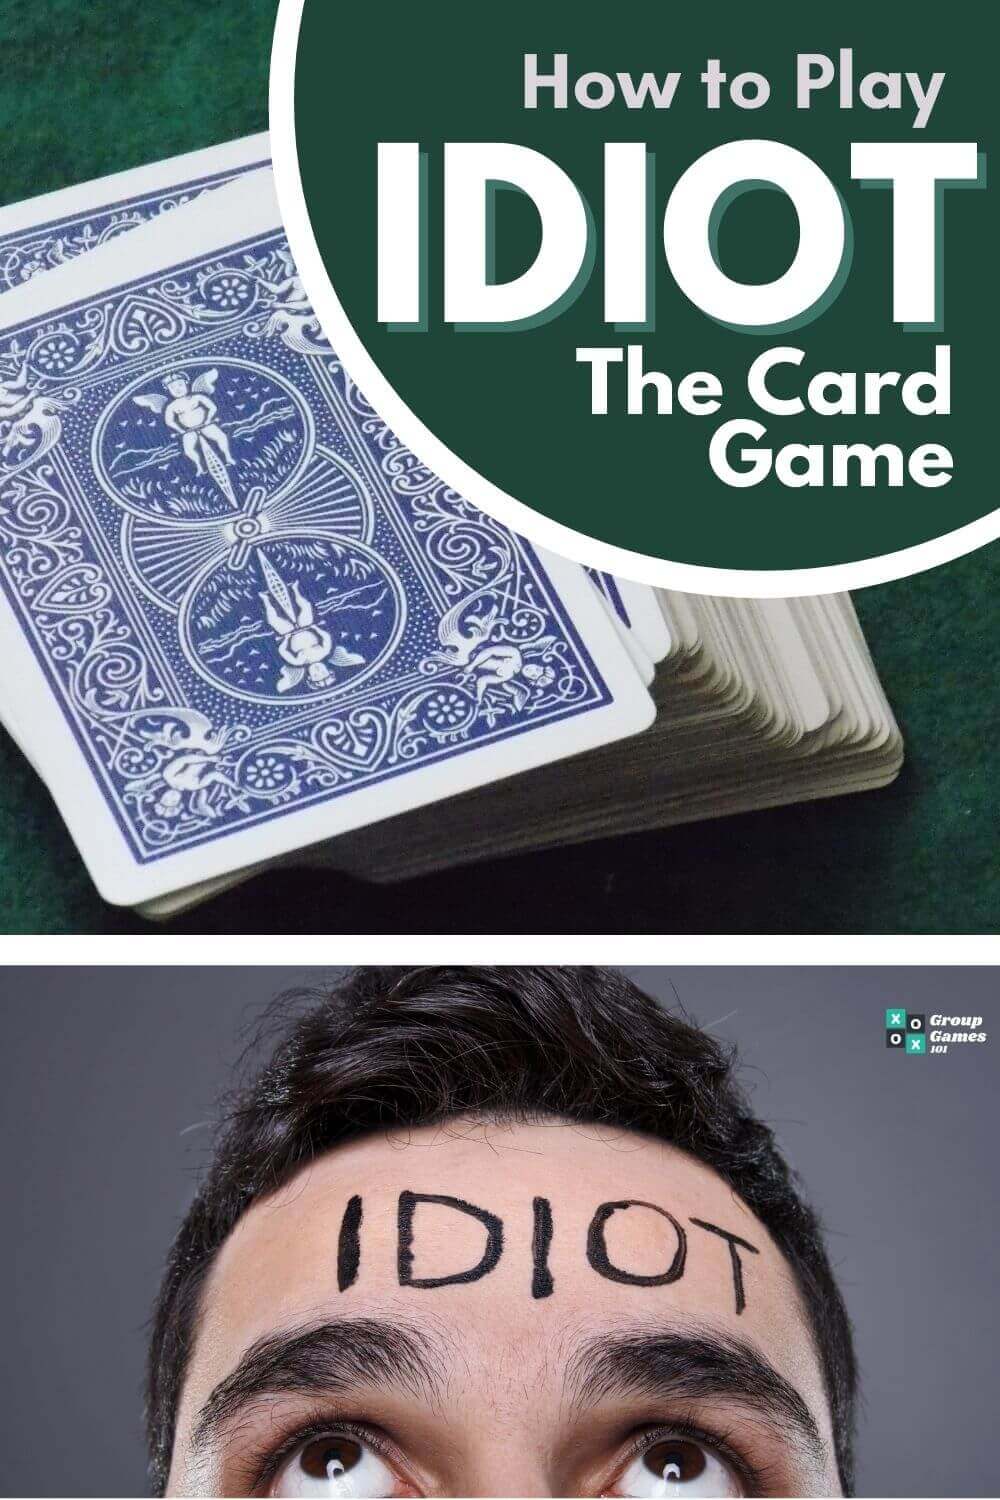 Idiot the card game Learn the rules and how to play